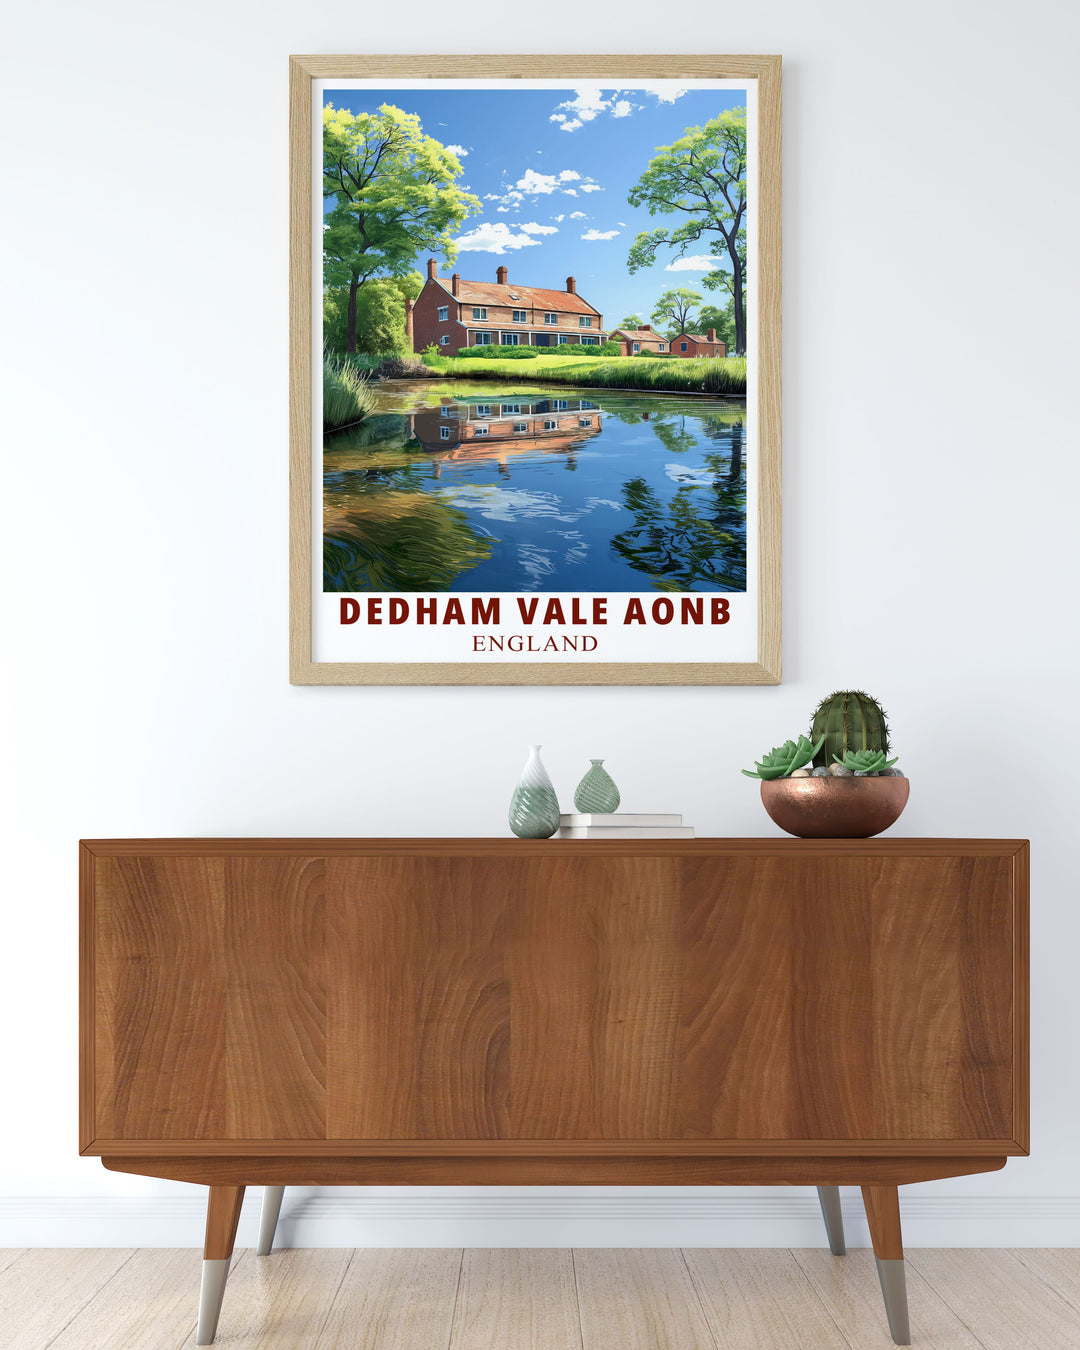 Travel poster featuring the scenic beauty of Dedham Vale, highlighting the lush meadows and winding rivers of Englands countryside, ideal for adding a touch of natural charm to your decor.